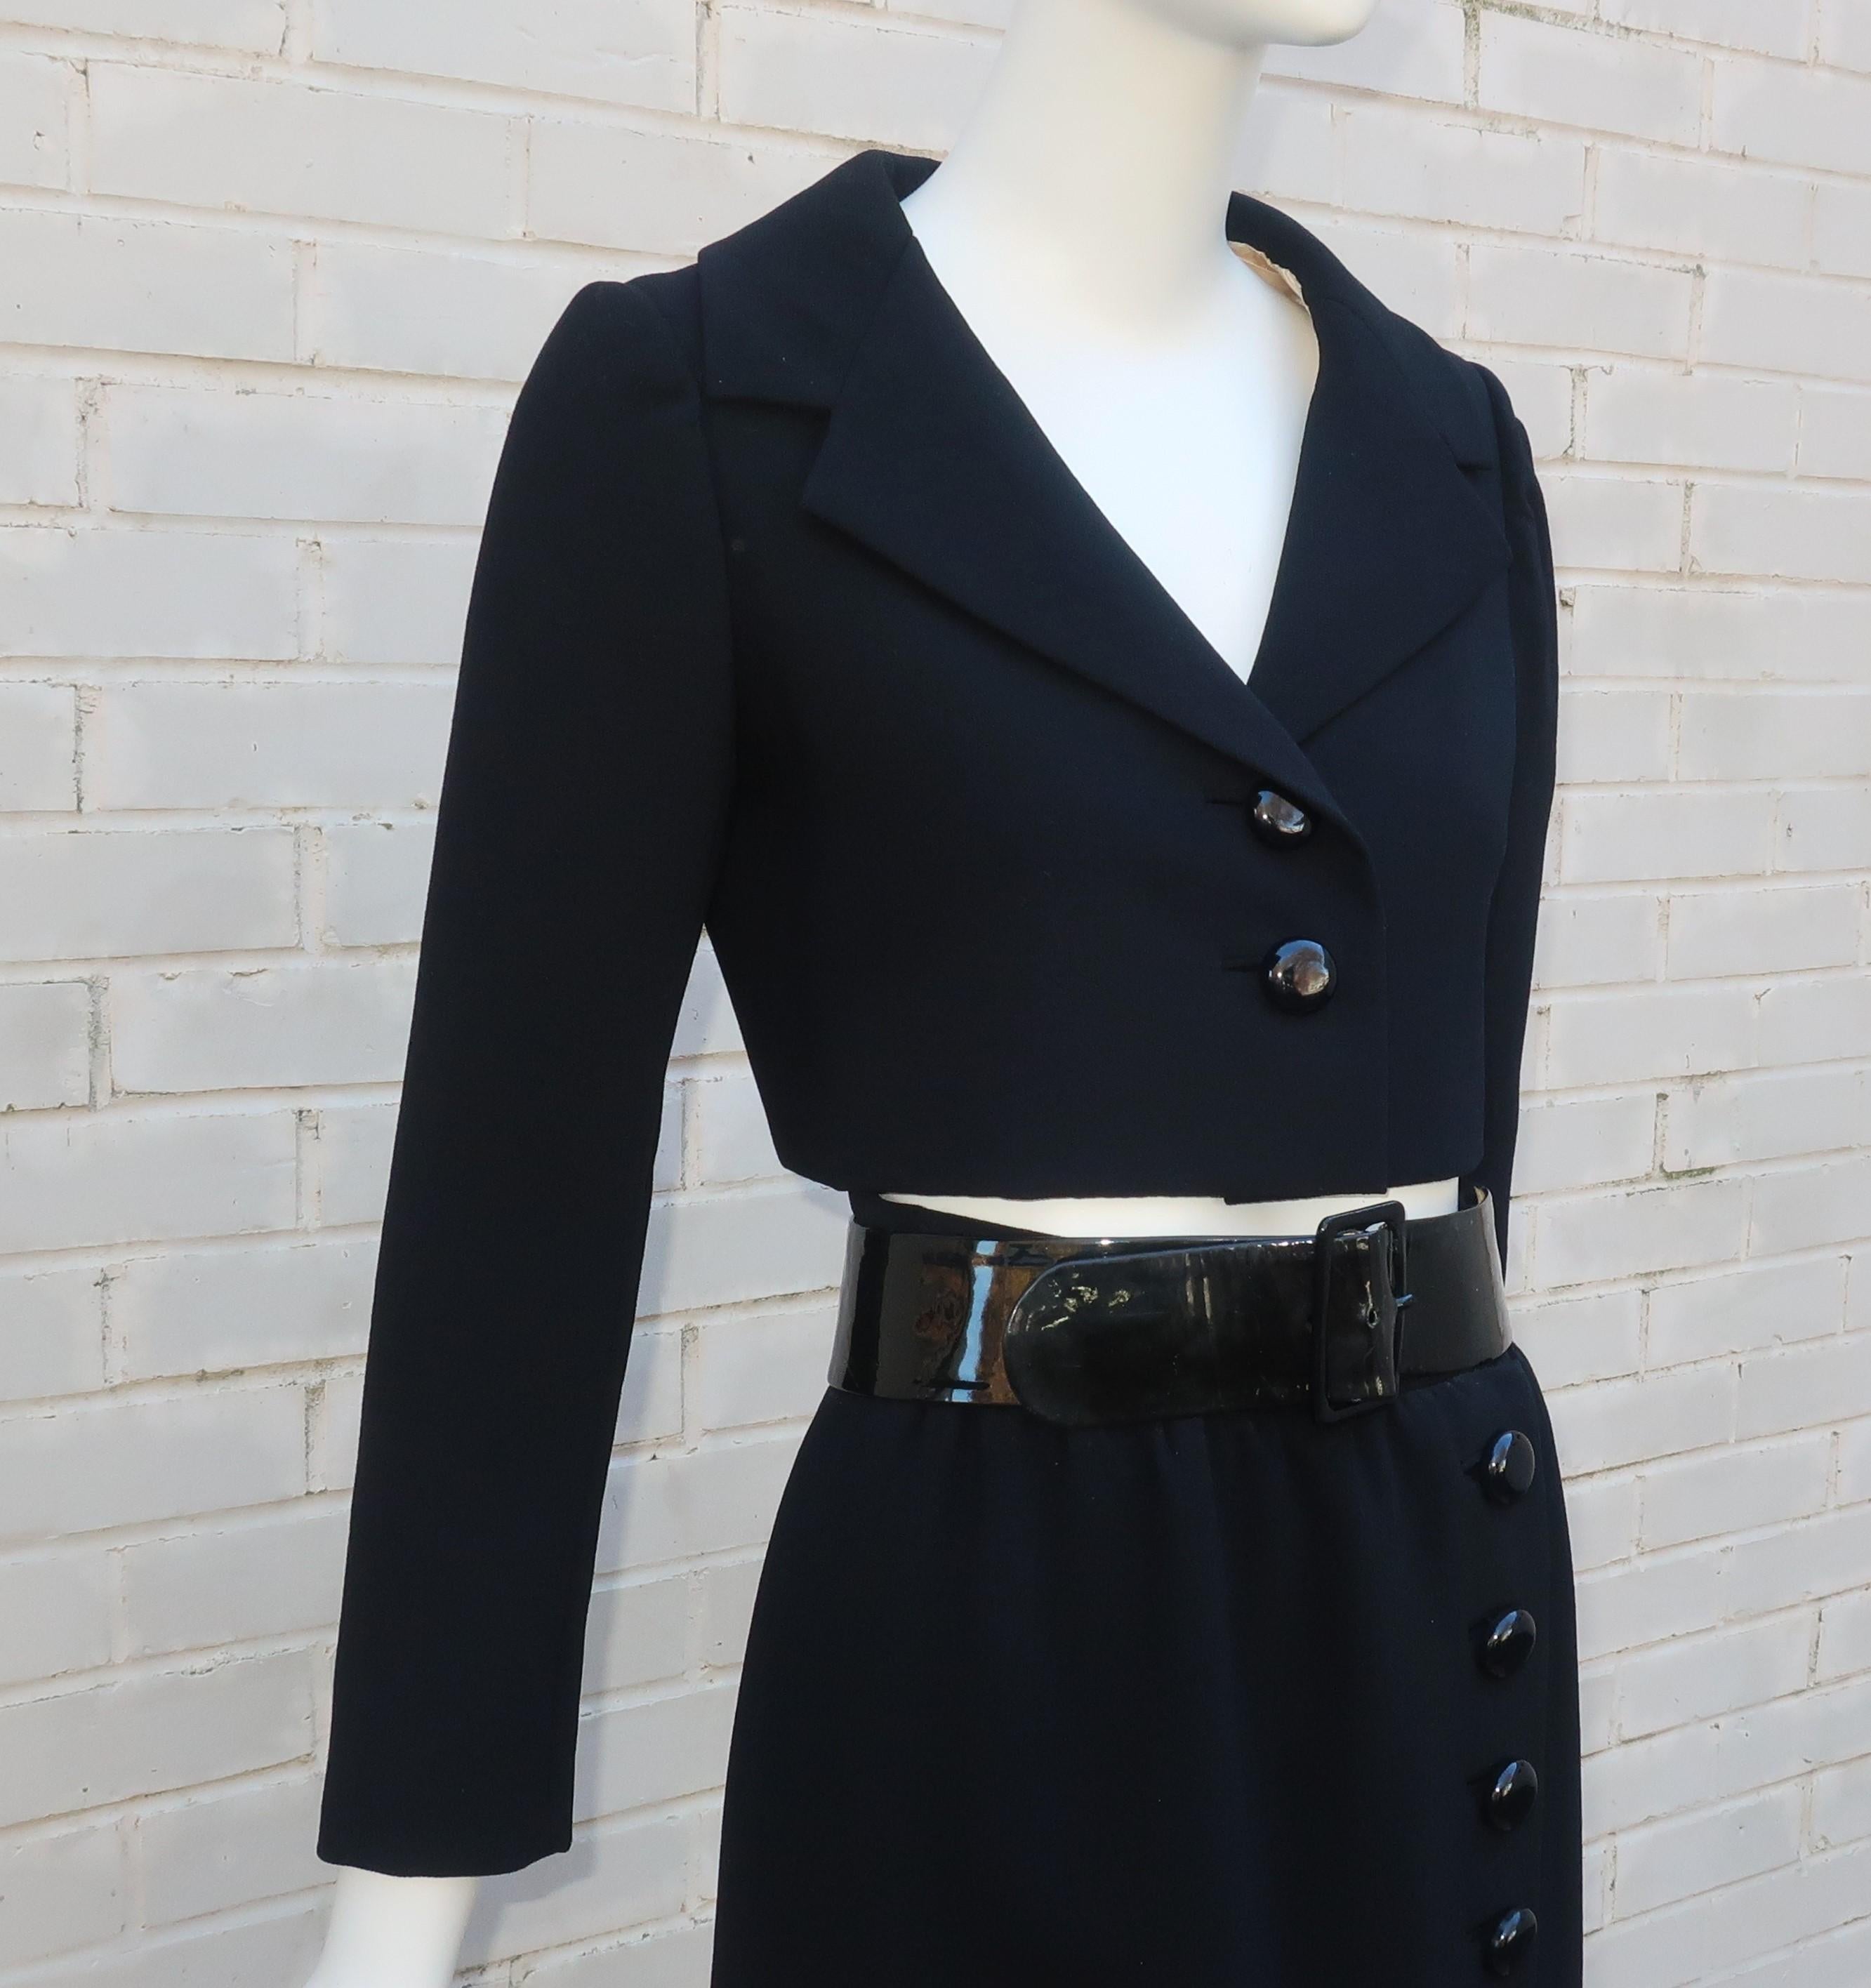 Norman Norell Belted Maxi Skirt Evening Suit With Cropped Jacket, 1968 In Good Condition For Sale In Atlanta, GA